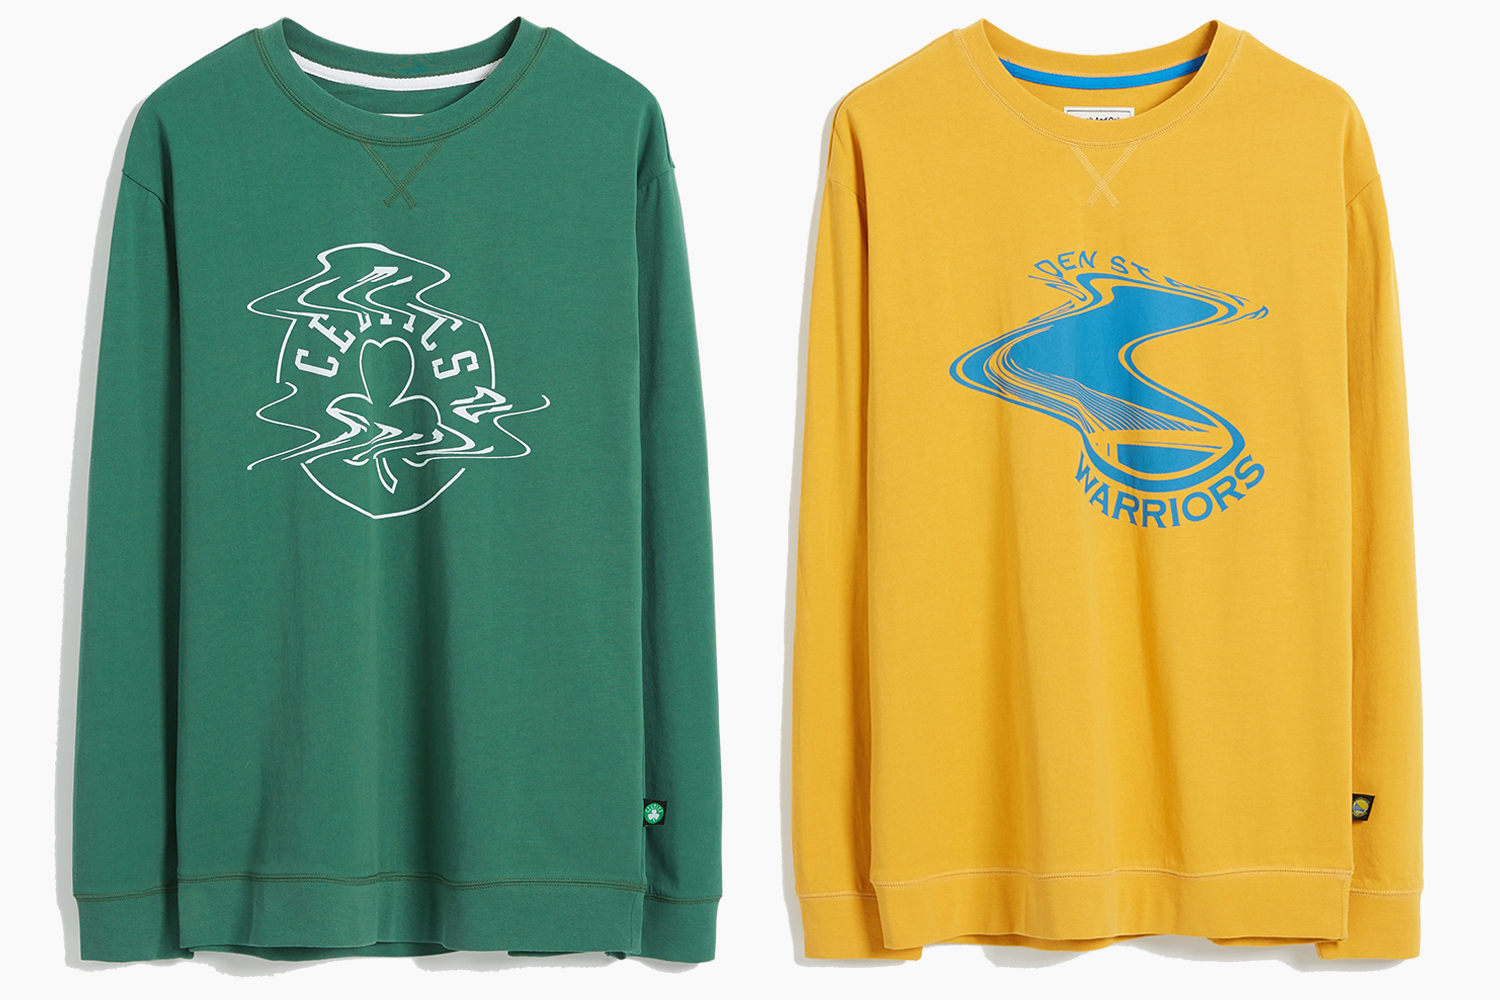 Take 50% off the Twisted Logo NBA collection for the Warriors, Celtics and 76ers.